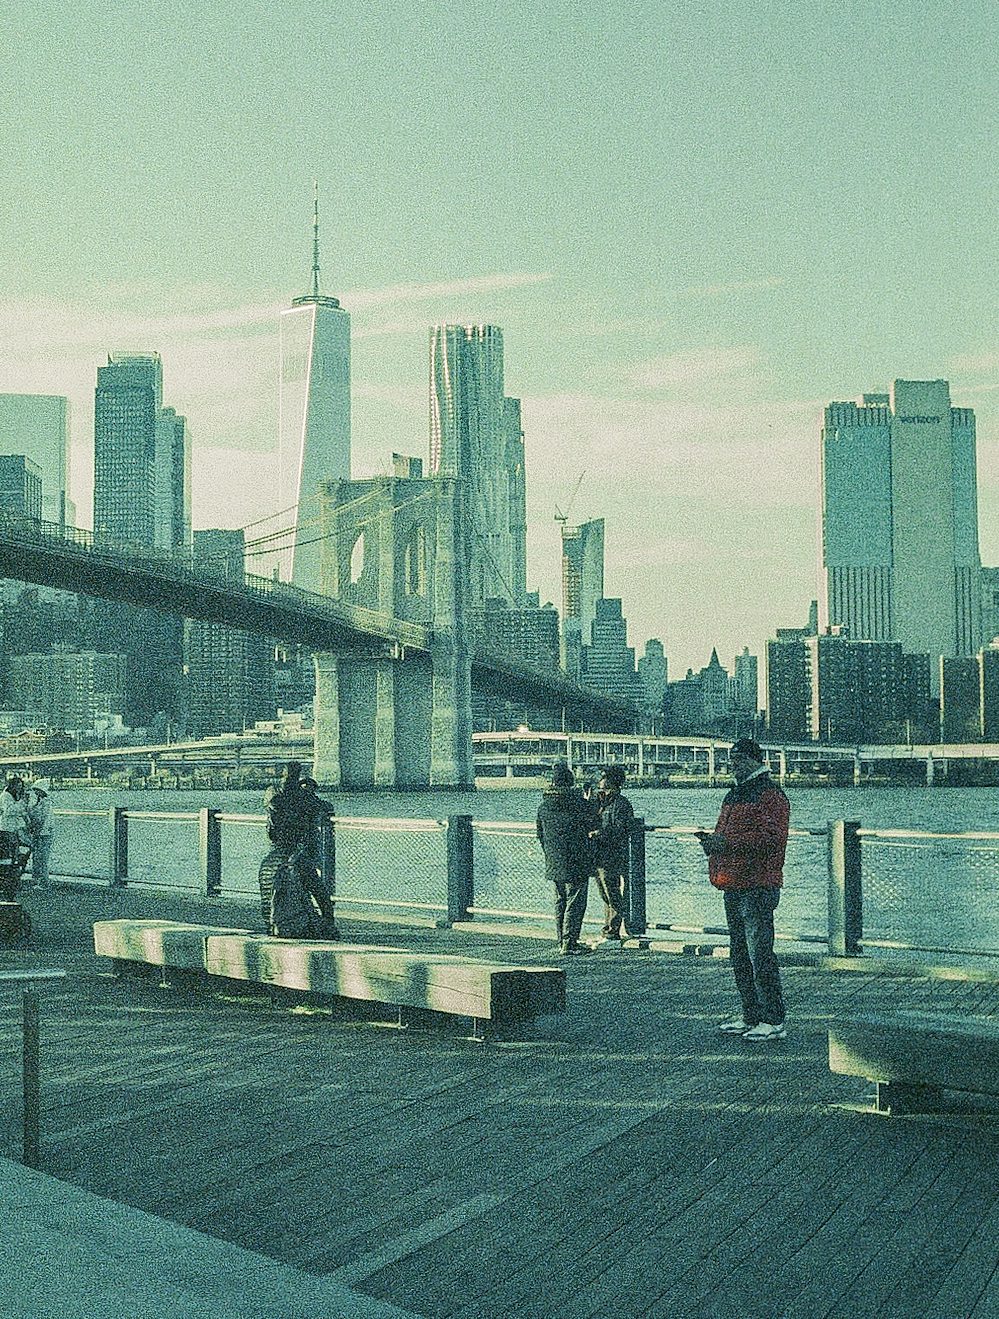 NYC on retrochrome 400 accidentally rated at 500 iso